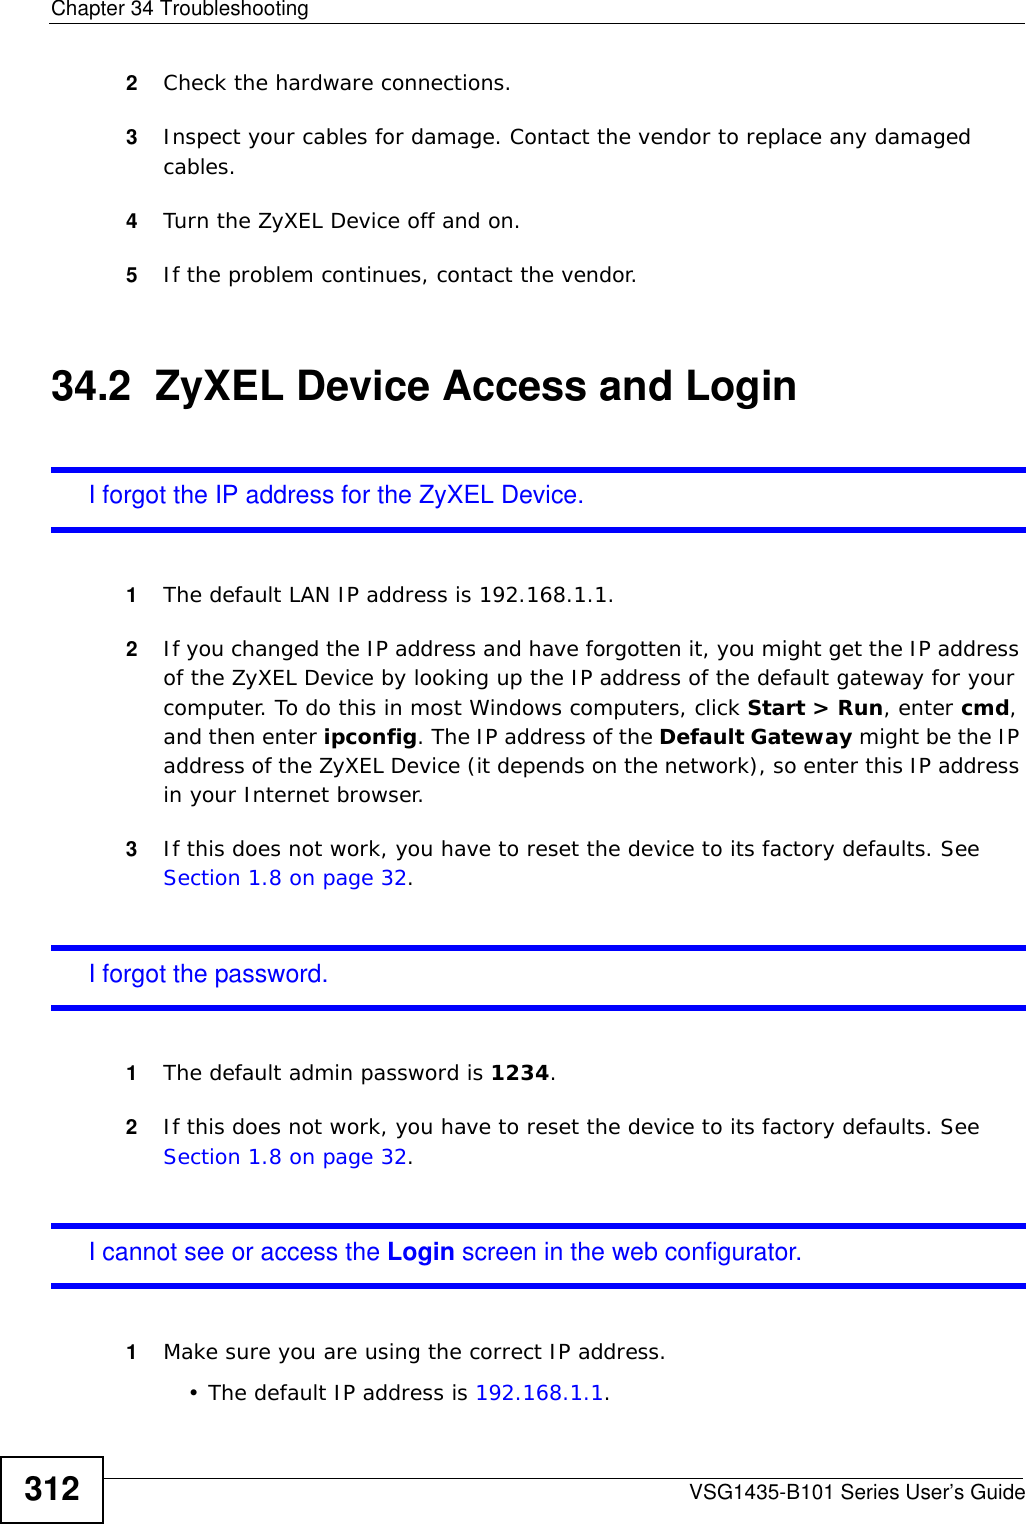 Chapter 34 TroubleshootingVSG1435-B101 Series User’s Guide3122Check the hardware connections.3Inspect your cables for damage. Contact the vendor to replace any damaged cables.4Turn the ZyXEL Device off and on.5If the problem continues, contact the vendor.34.2  ZyXEL Device Access and LoginI forgot the IP address for the ZyXEL Device.1The default LAN IP address is 192.168.1.1.2If you changed the IP address and have forgotten it, you might get the IP address of the ZyXEL Device by looking up the IP address of the default gateway for your computer. To do this in most Windows computers, click Start &gt; Run, enter cmd, and then enter ipconfig. The IP address of the Default Gateway might be the IP address of the ZyXEL Device (it depends on the network), so enter this IP address in your Internet browser.3If this does not work, you have to reset the device to its factory defaults. See Section 1.8 on page 32.I forgot the password.1The default admin password is 1234.2If this does not work, you have to reset the device to its factory defaults. See Section 1.8 on page 32.I cannot see or access the Login screen in the web configurator.1Make sure you are using the correct IP address.• The default IP address is 192.168.1.1.